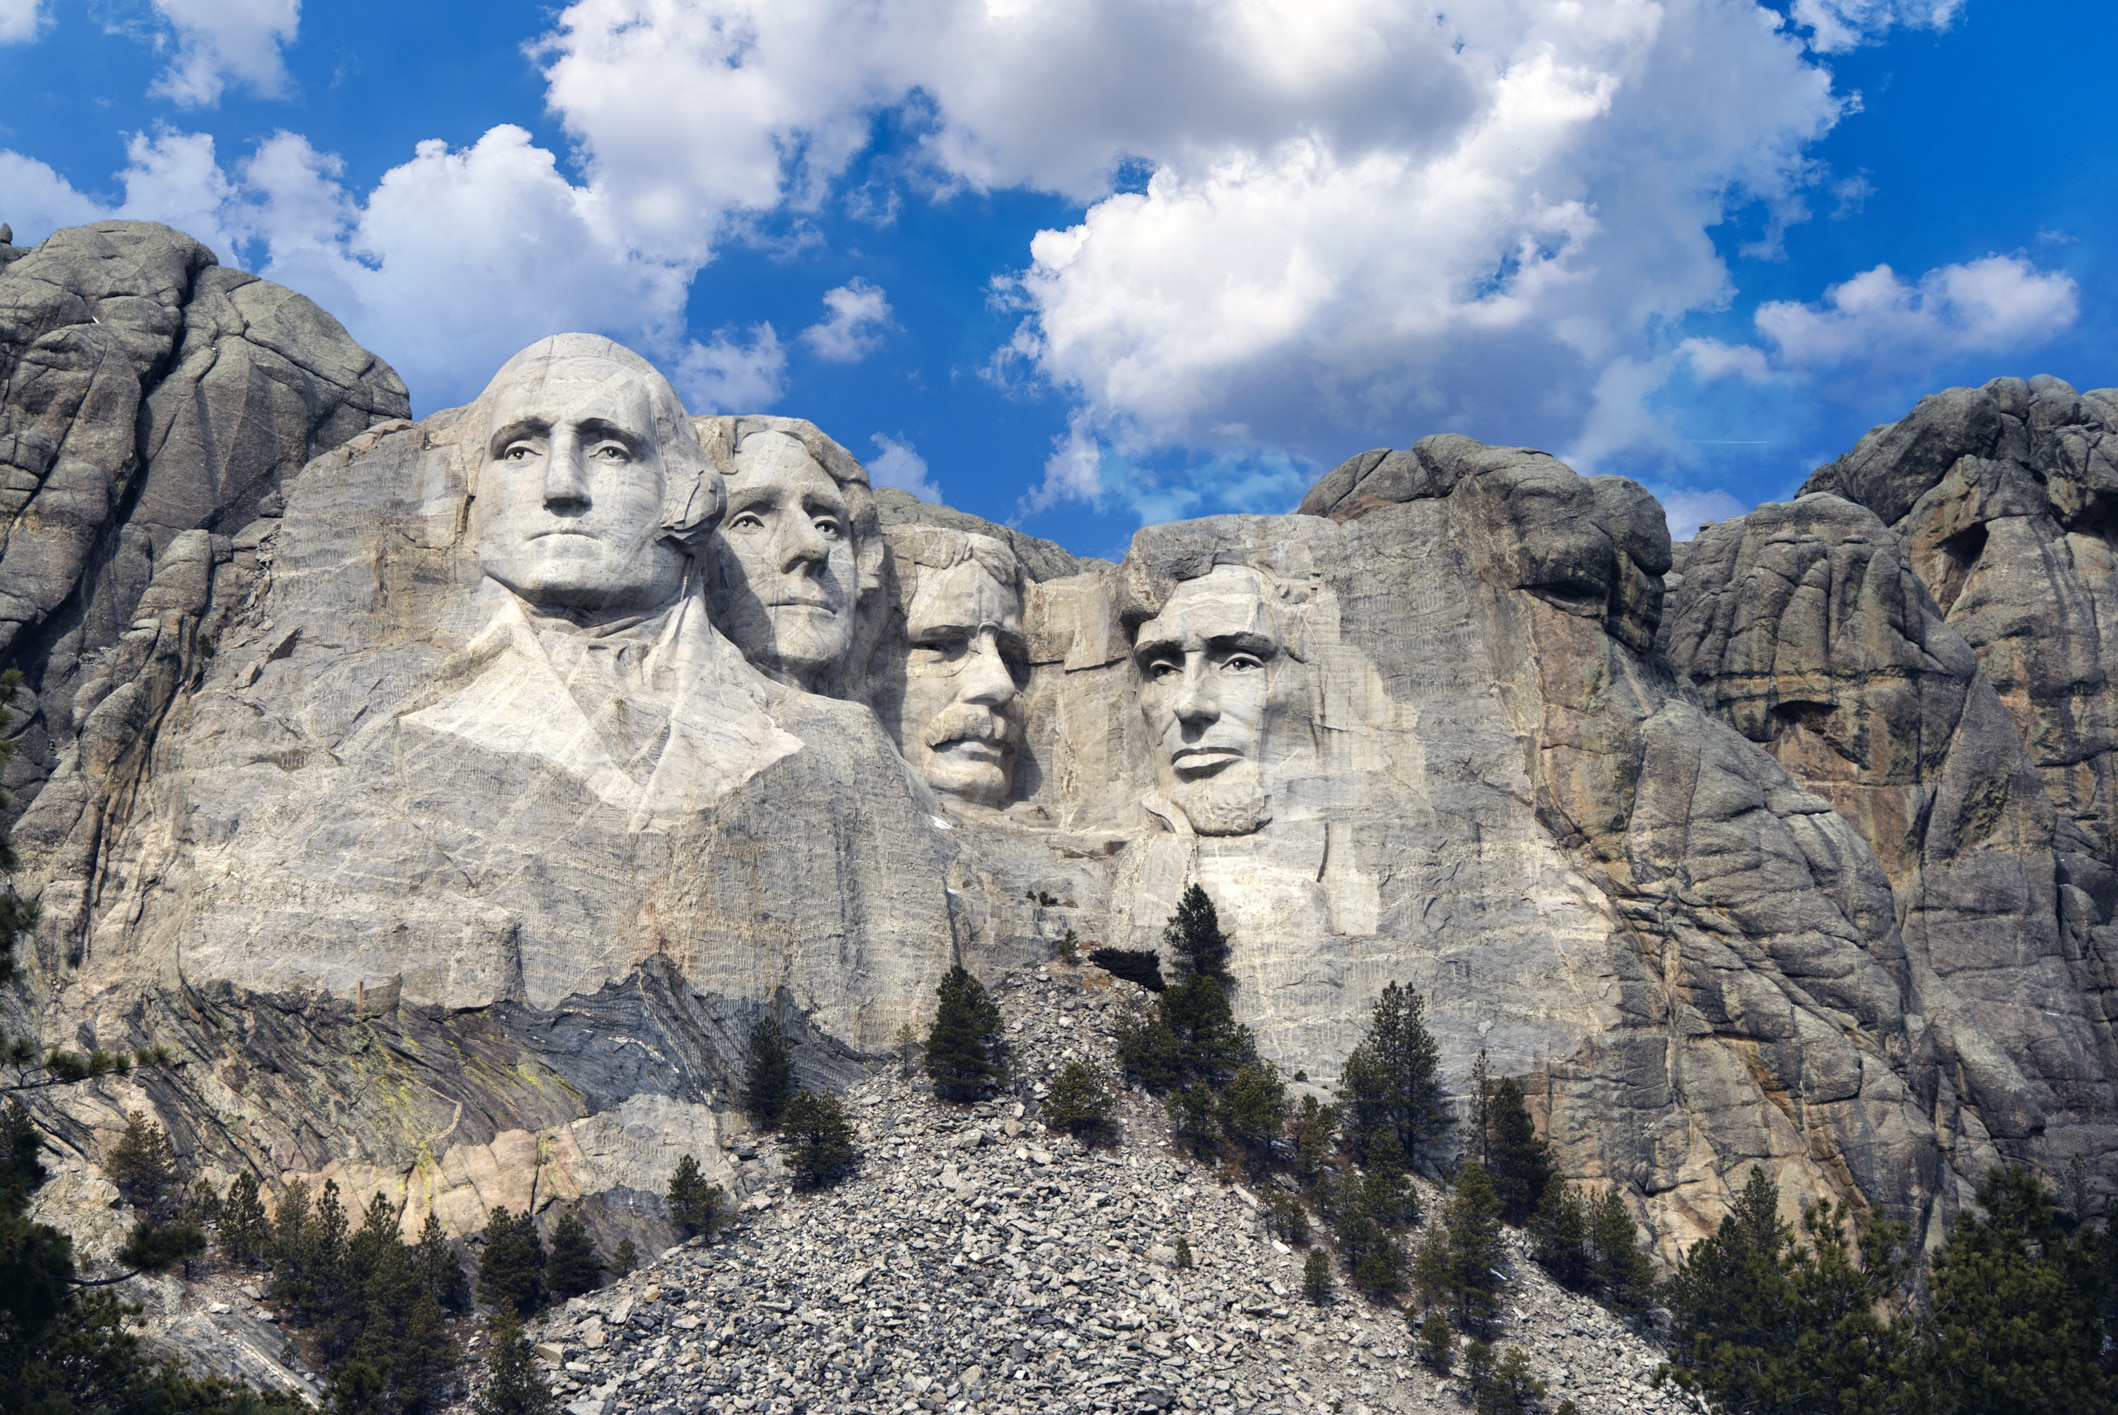 Mount Rushmore trip on a budget.